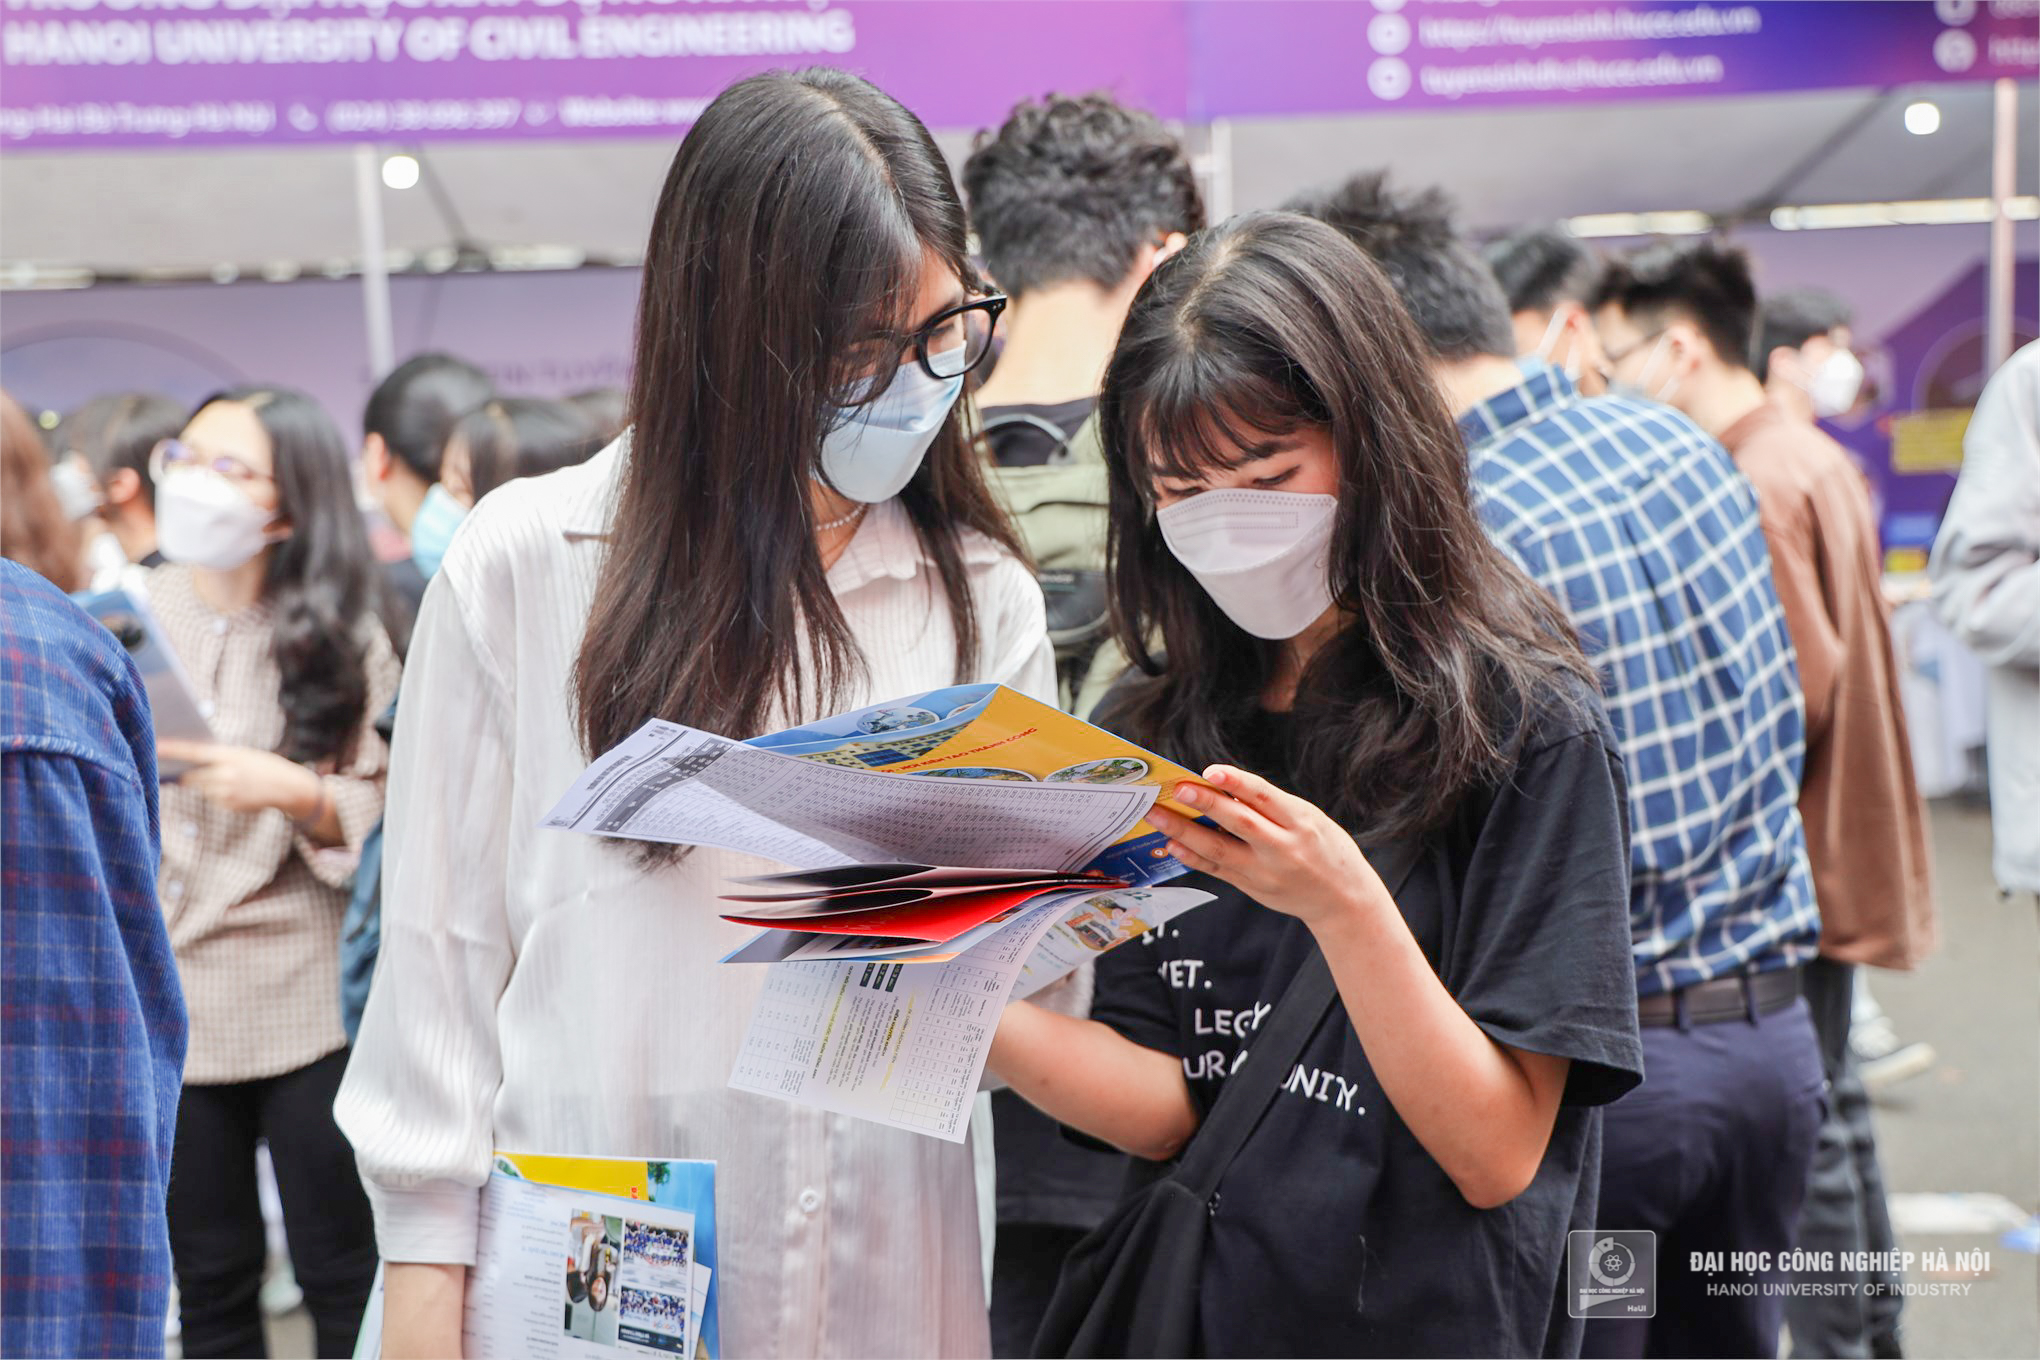 The Admission Consultation and Career Orientation Day 2022: the consultancy space of Hanoi University of Industry attracted over 14,000 visits